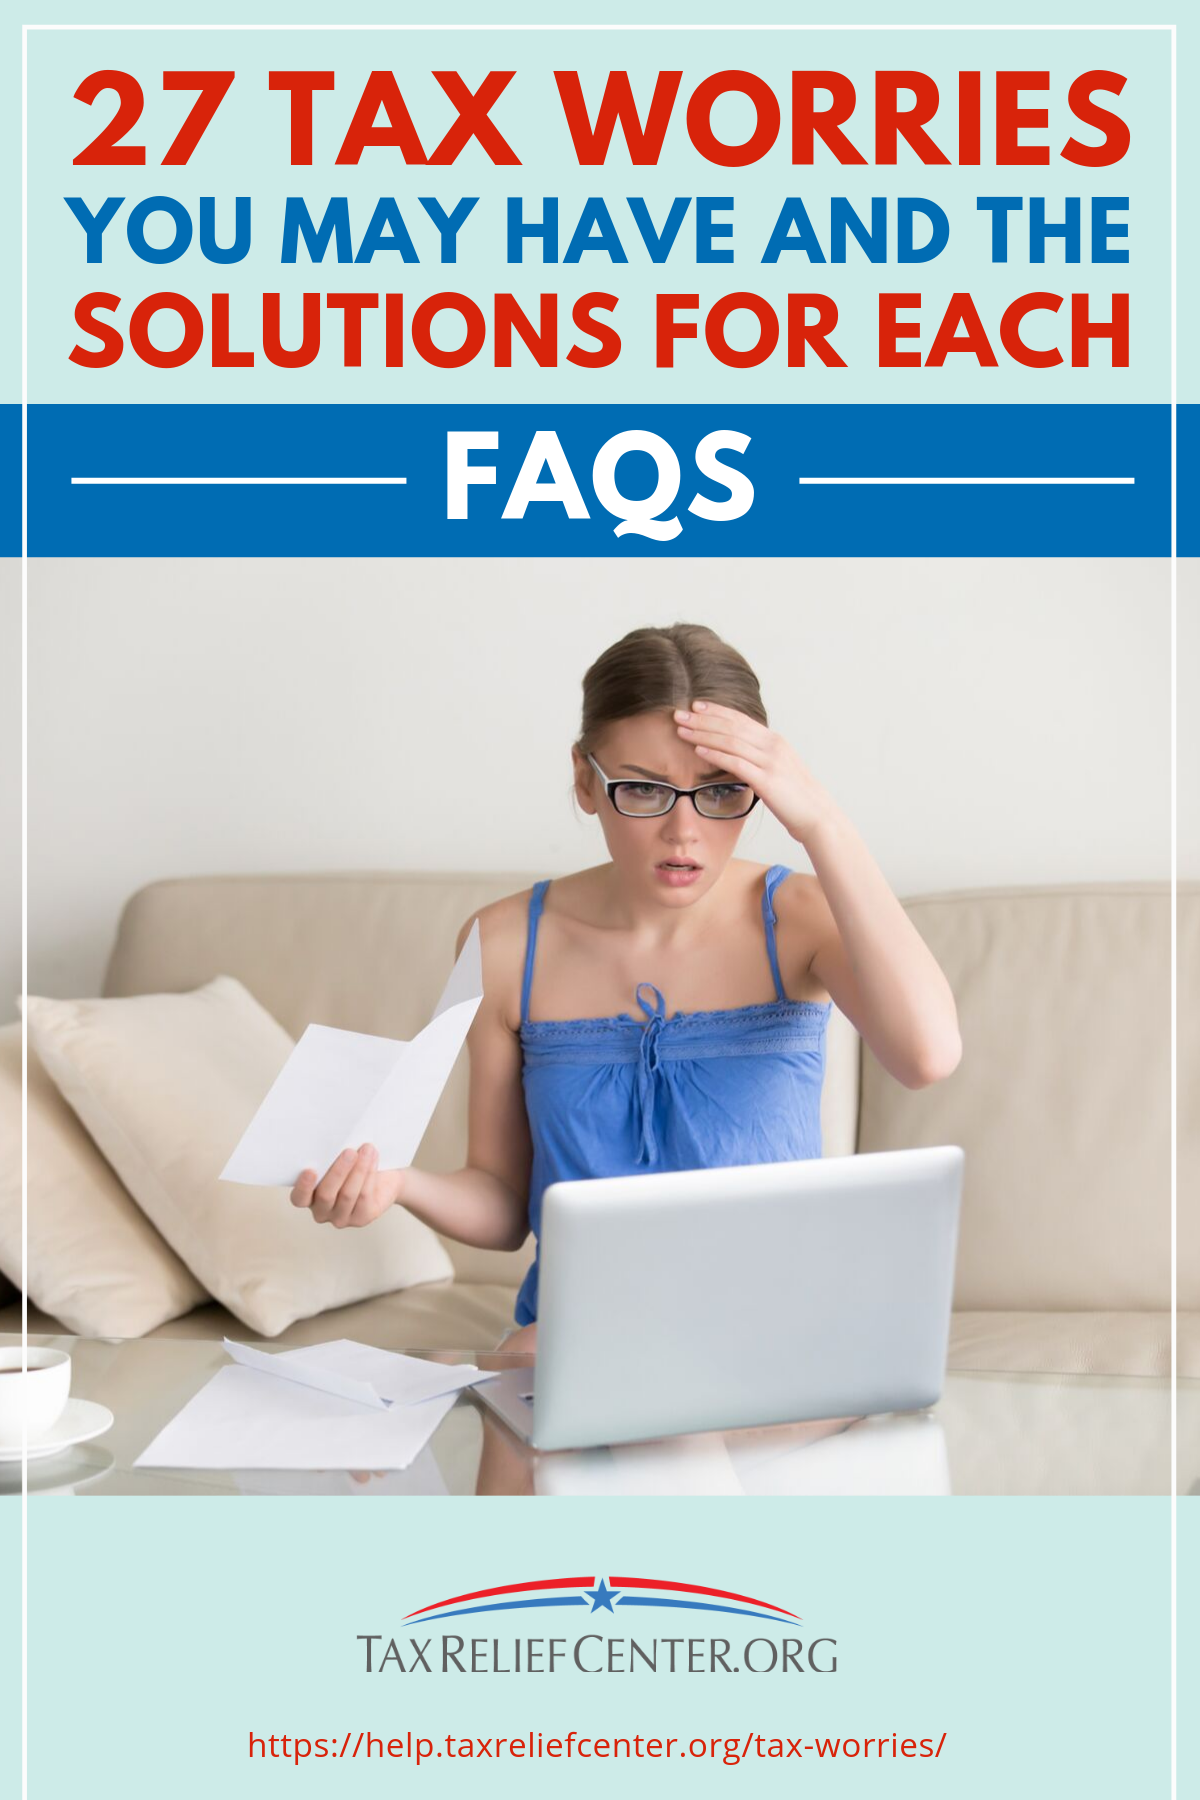 27 Tax Worries You May Have And The Solutions For Each [FAQs] https://help.taxreliefcenter.org/tax-worries/